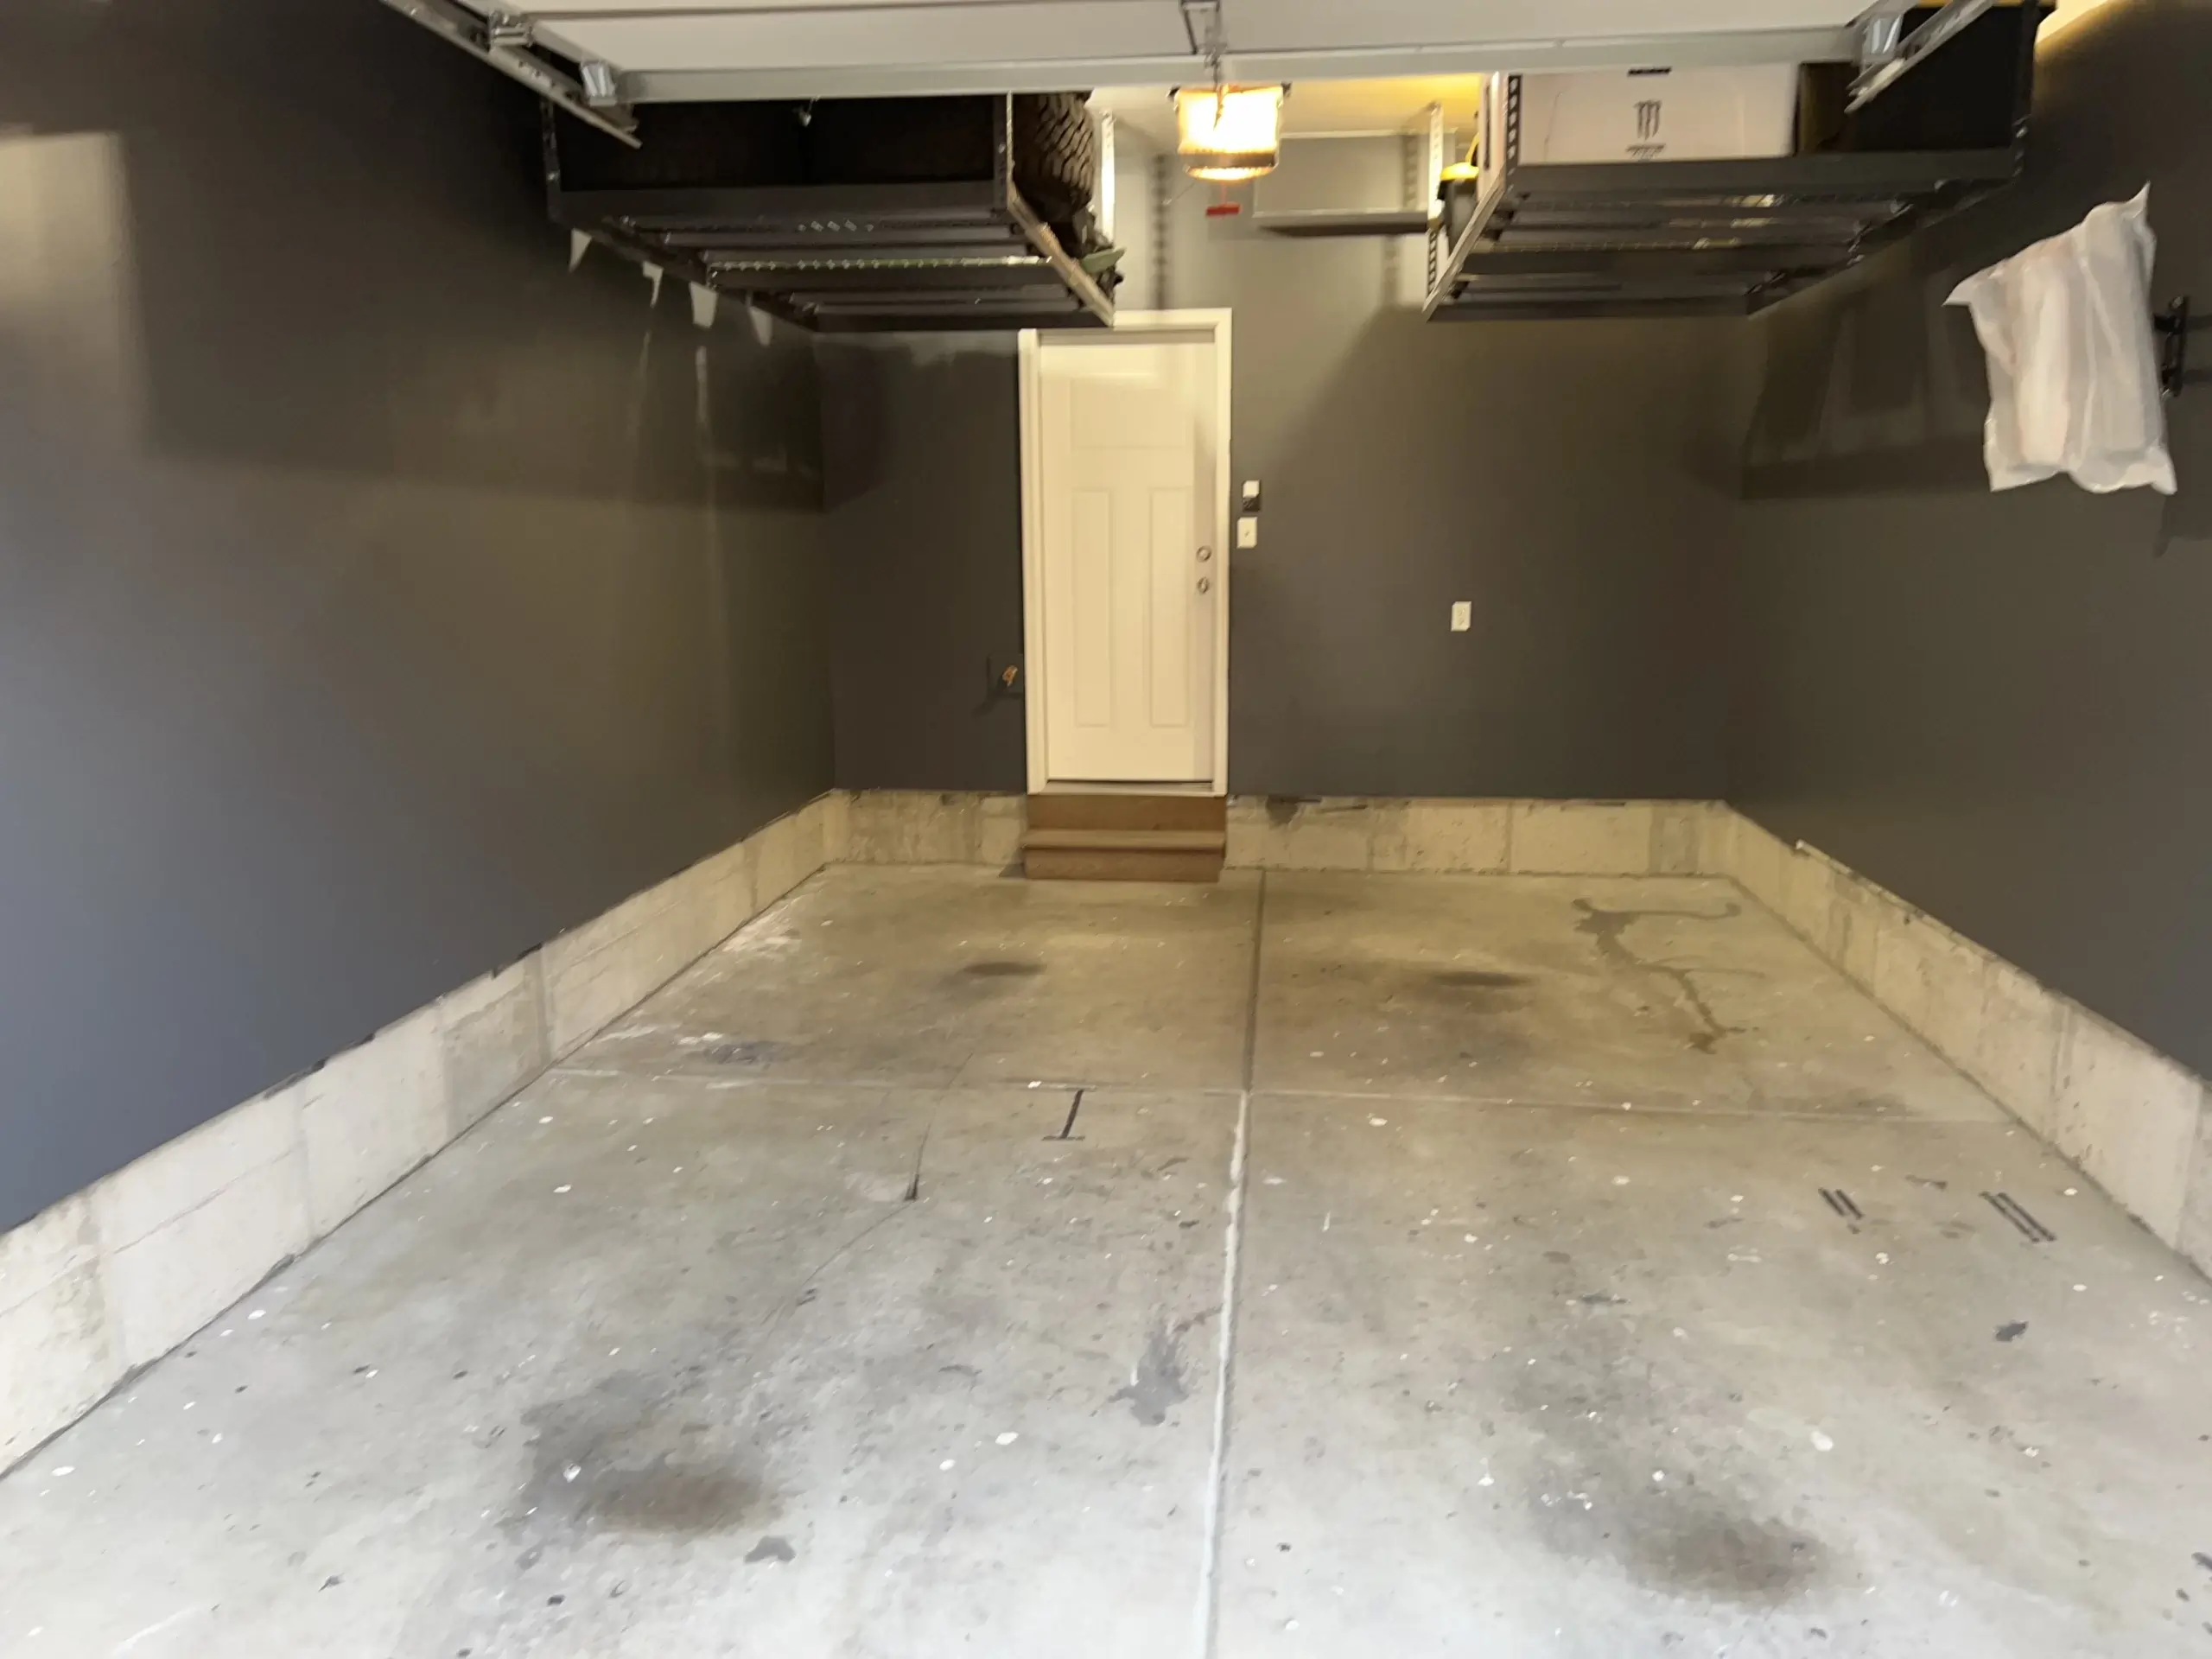 A before photo of an empty garage with a rugged-looking concrete floor and gray walls.